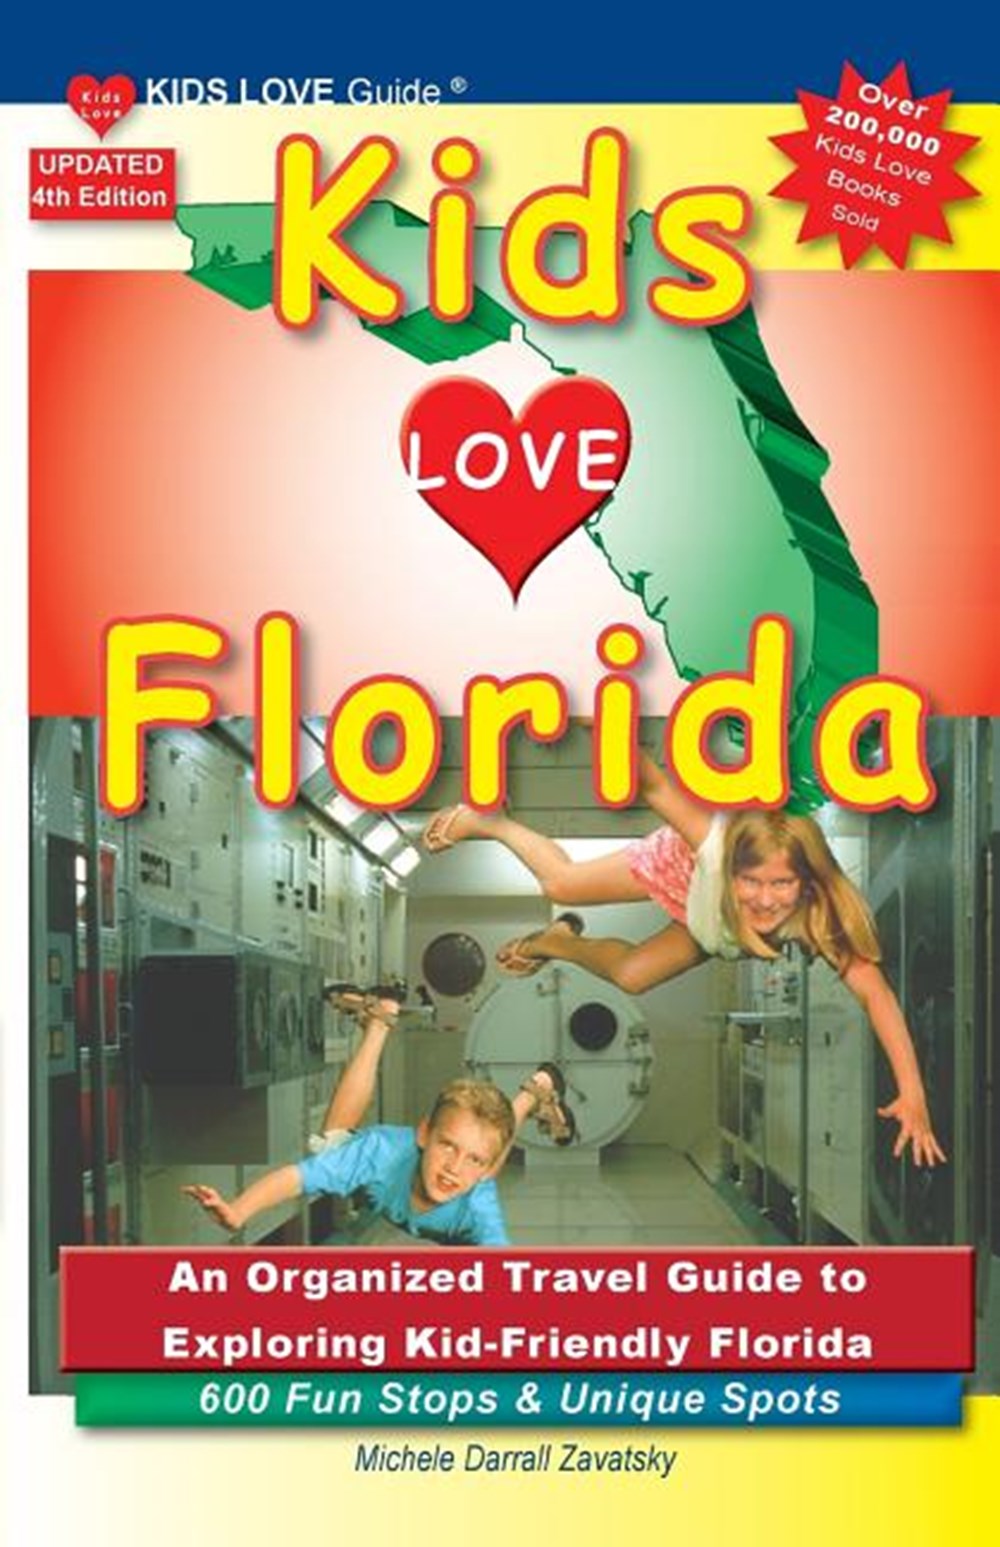 KIDS LOVE FLORIDA, 4th Edition: An Organized Family Travel Guide to Exploring Kid-Friendly Florida. 